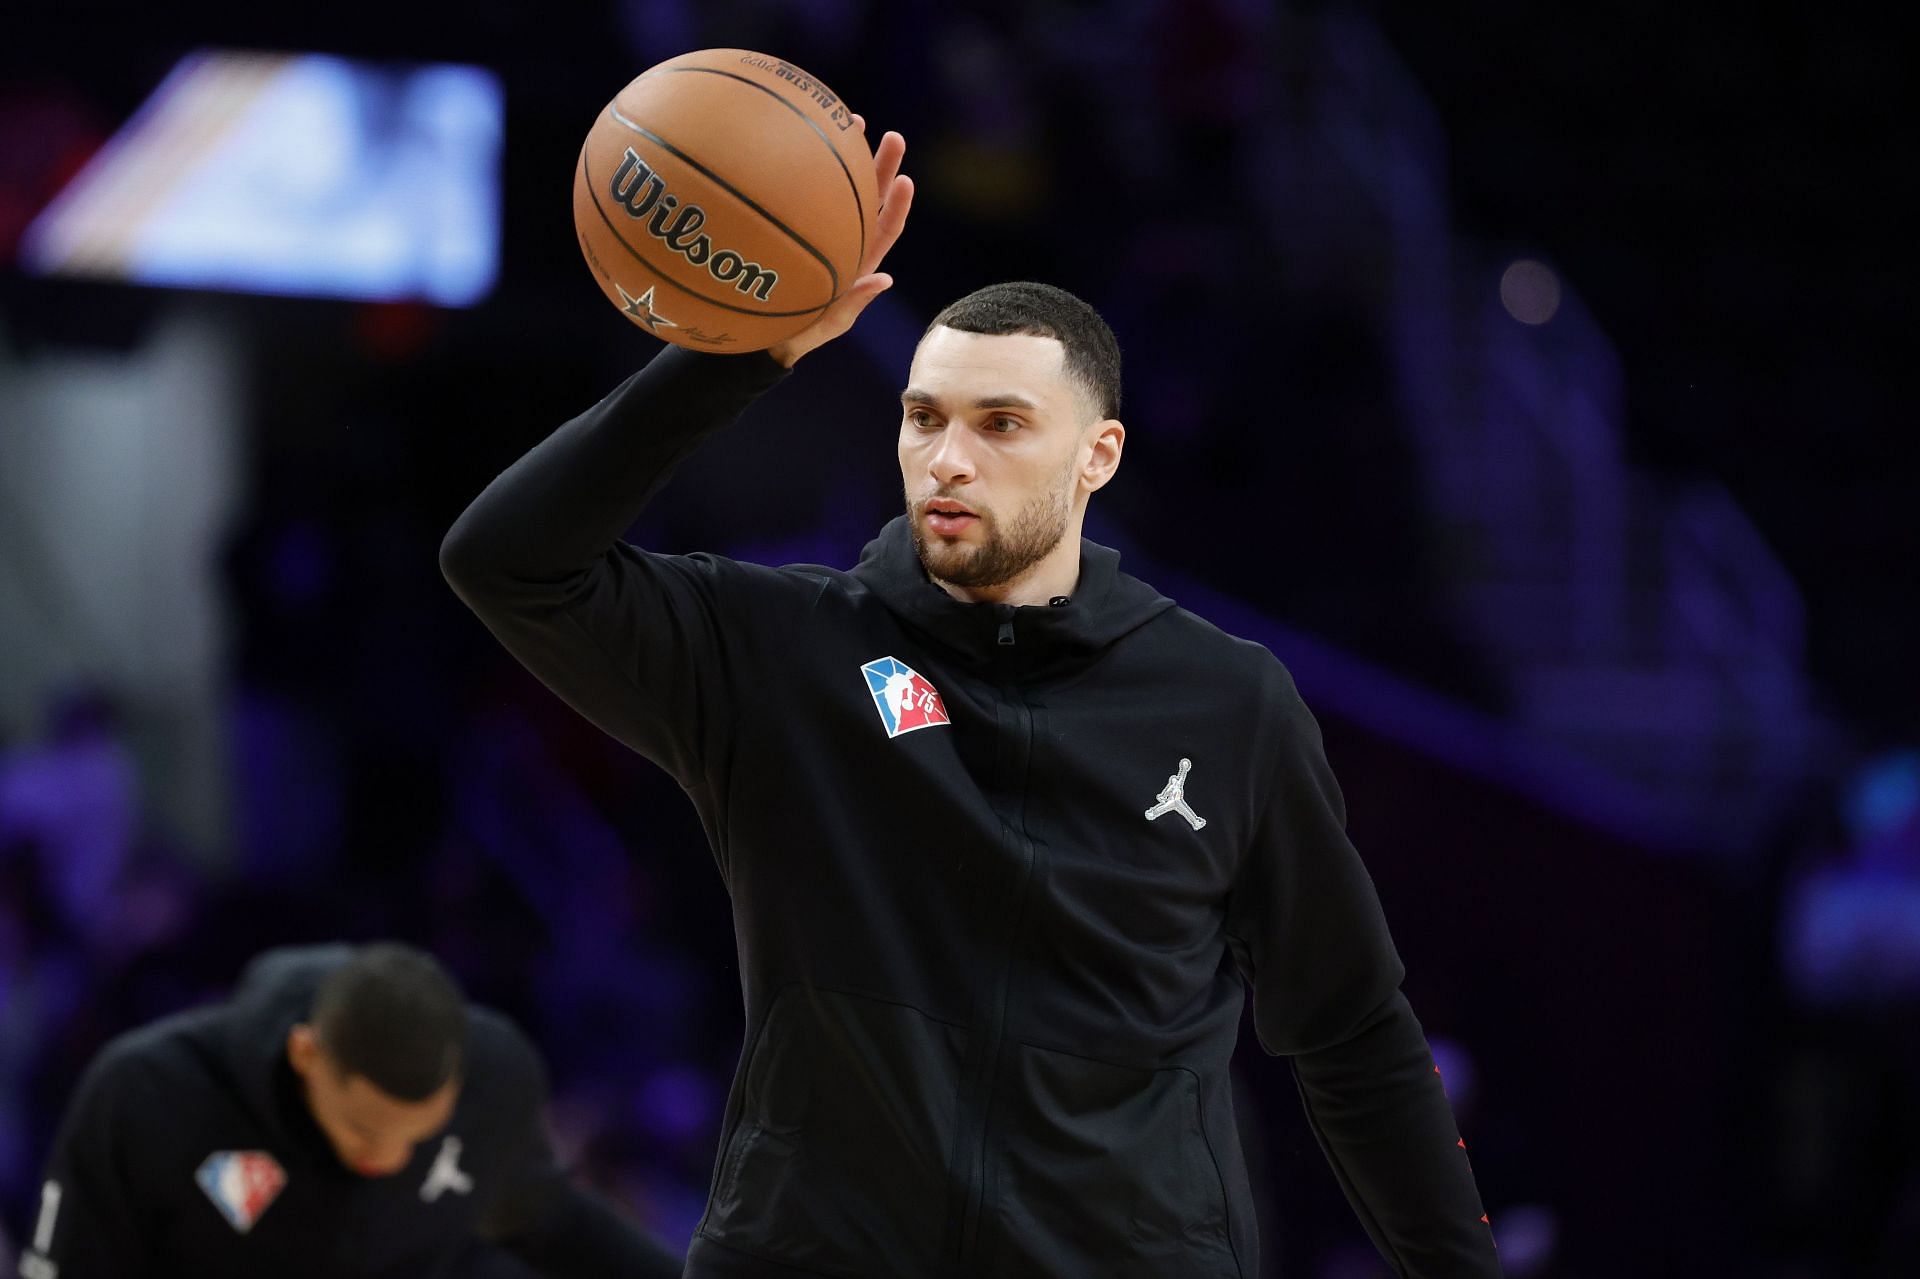 Zach LaVine of the Chicago Bulls at the 2022 NBA All-Star Game